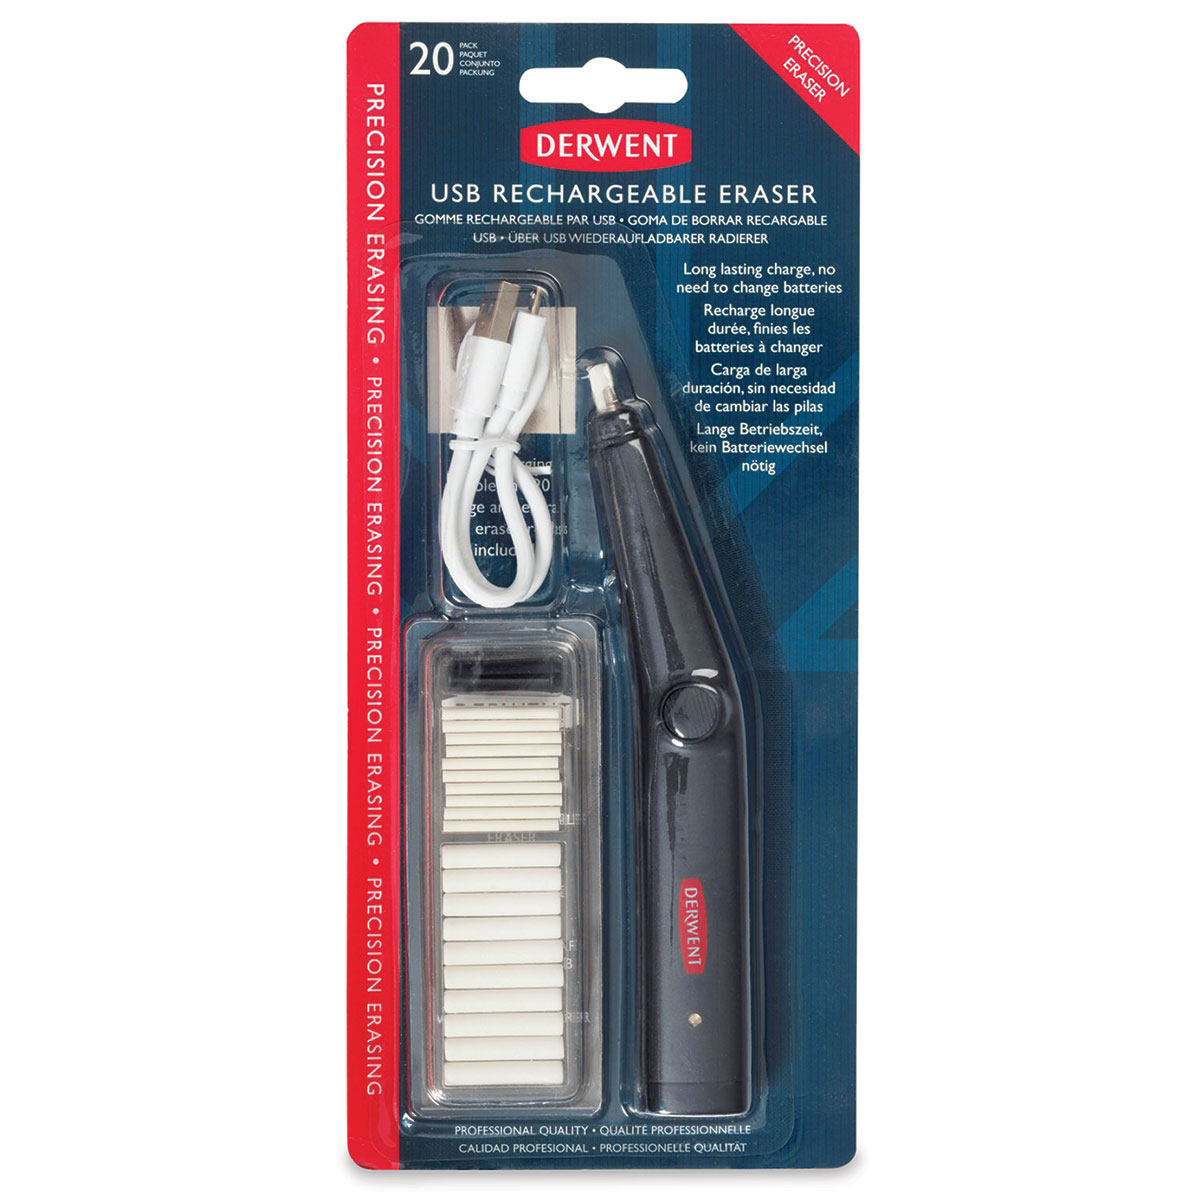 Derwent Electric Rechargeable Eraser Refills Pack of 30